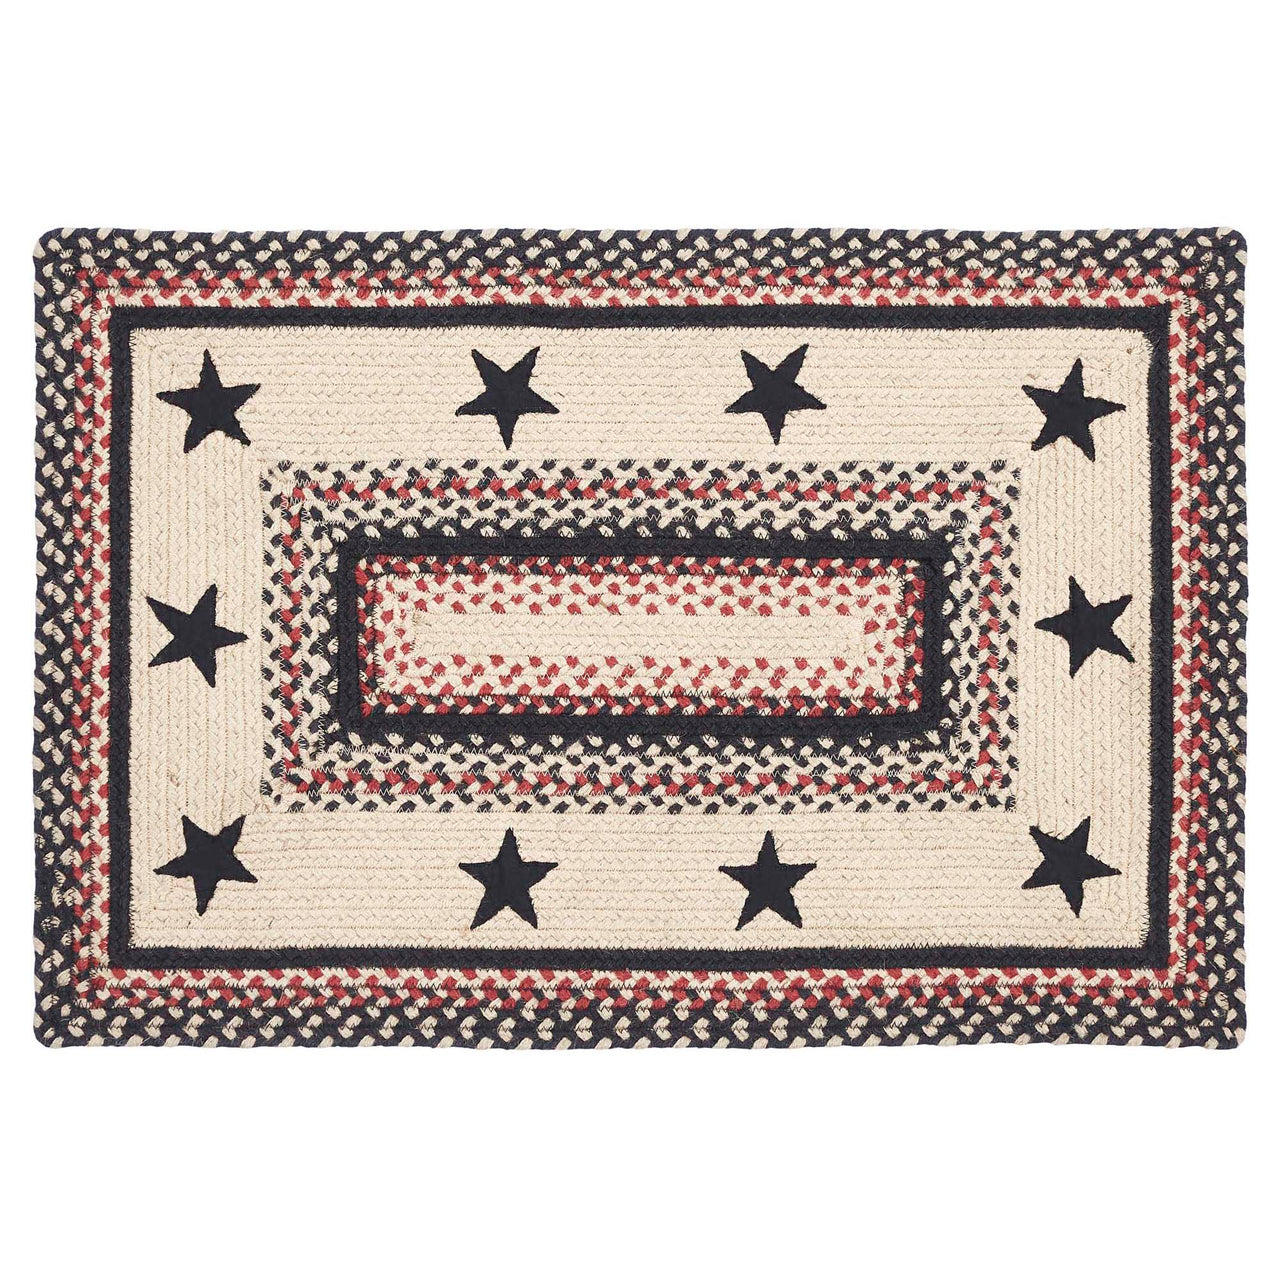 Colonial Star Jute Braided Rug Rect with Rug Pad 20"x30" VHC Brands